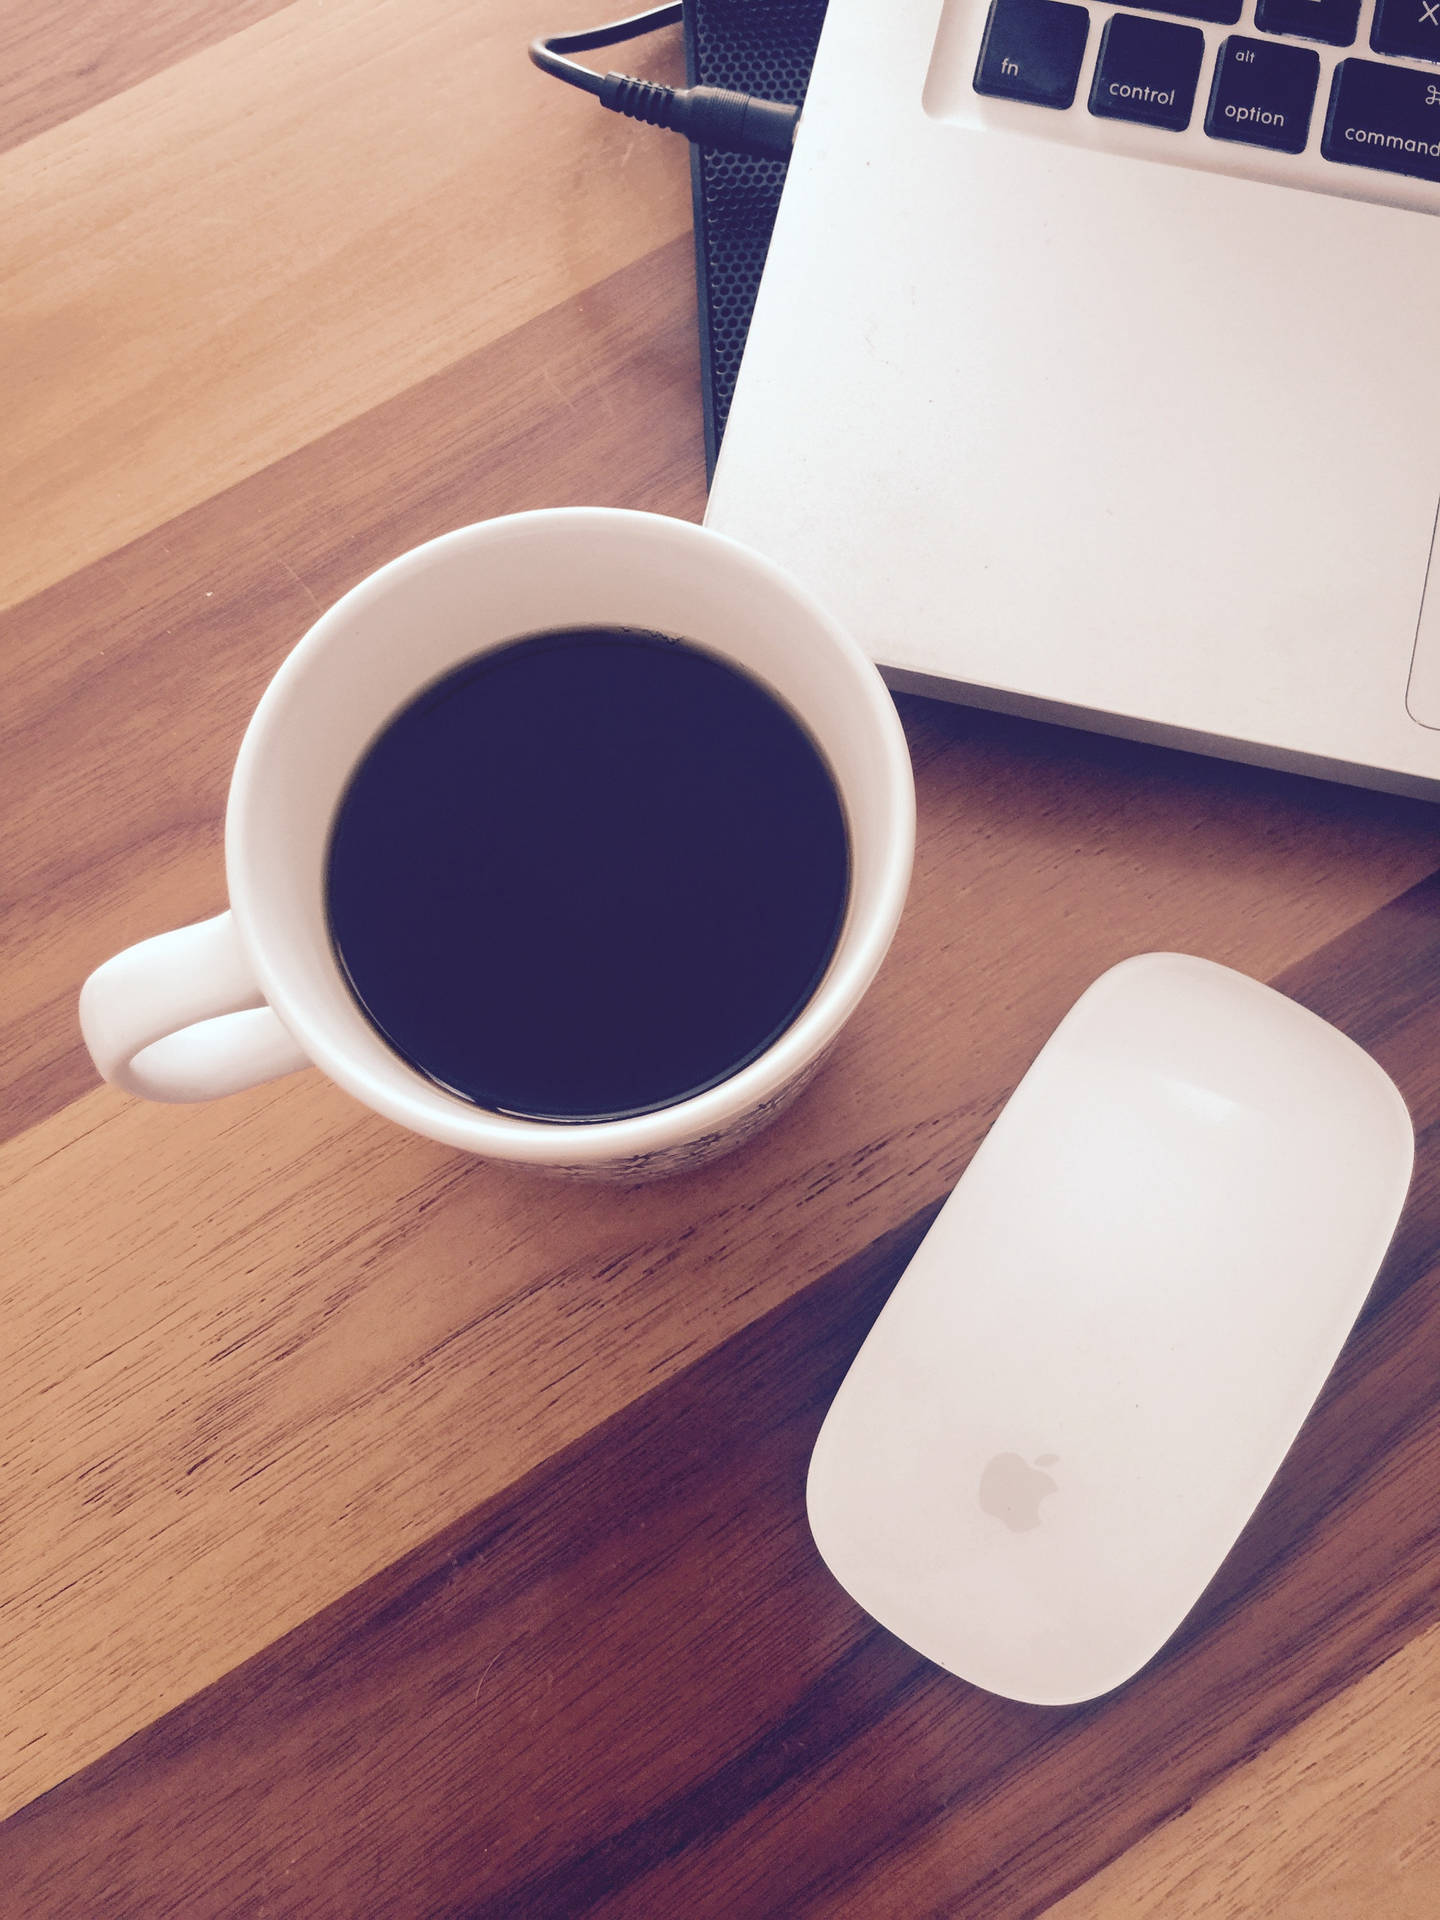 Best Laptop White Mouse And Coffee